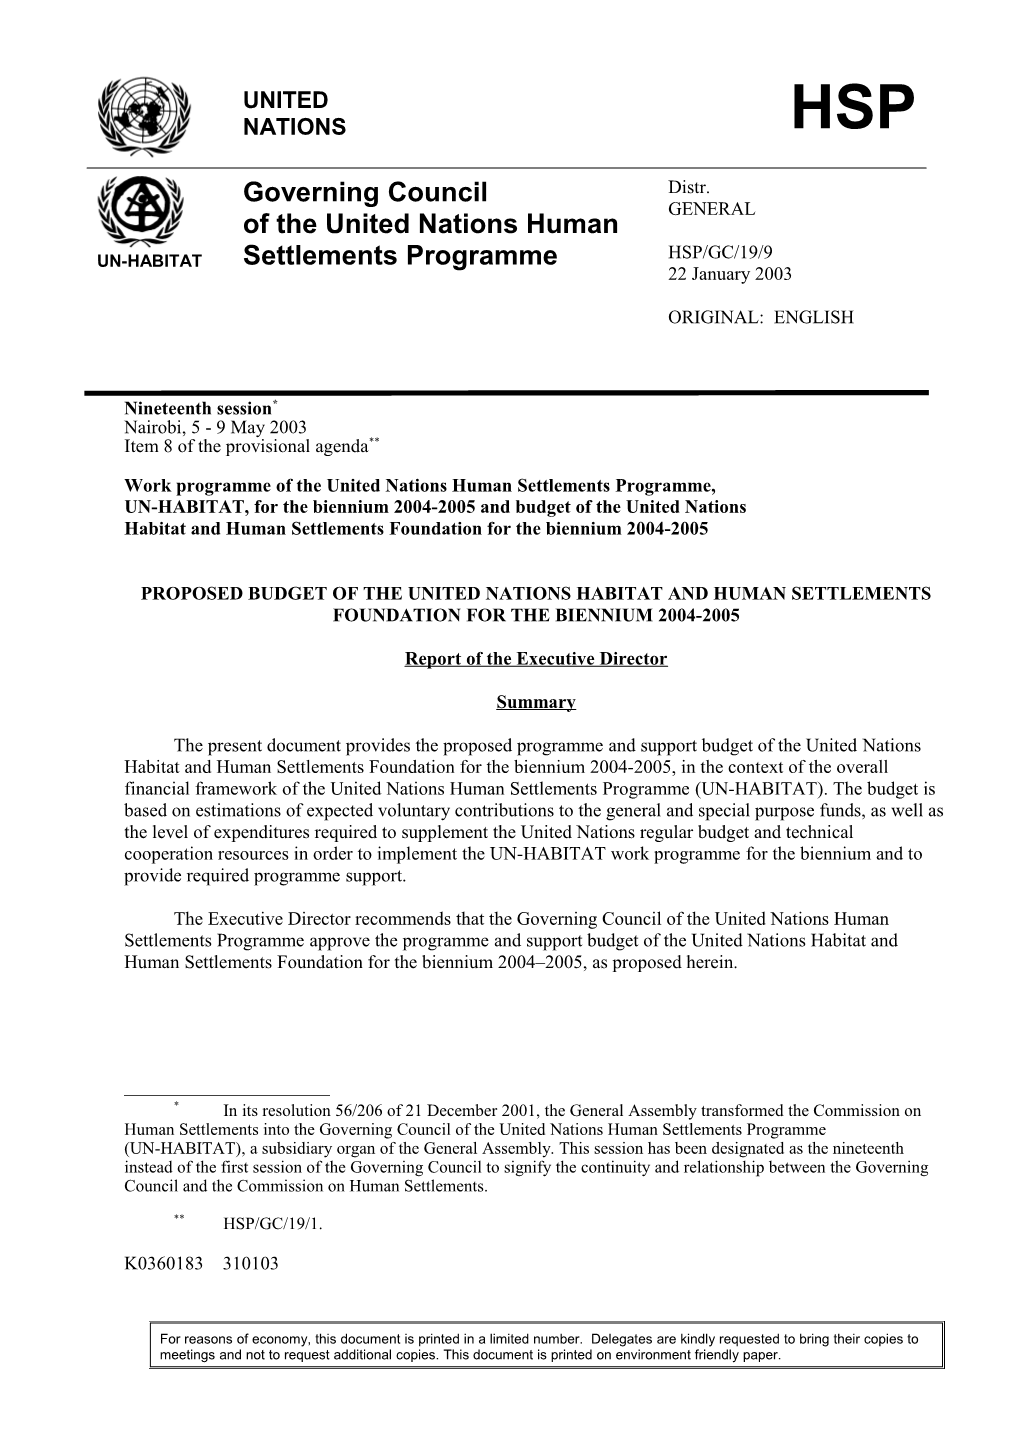 Work Programme of the United Nations Human Settlements Programme